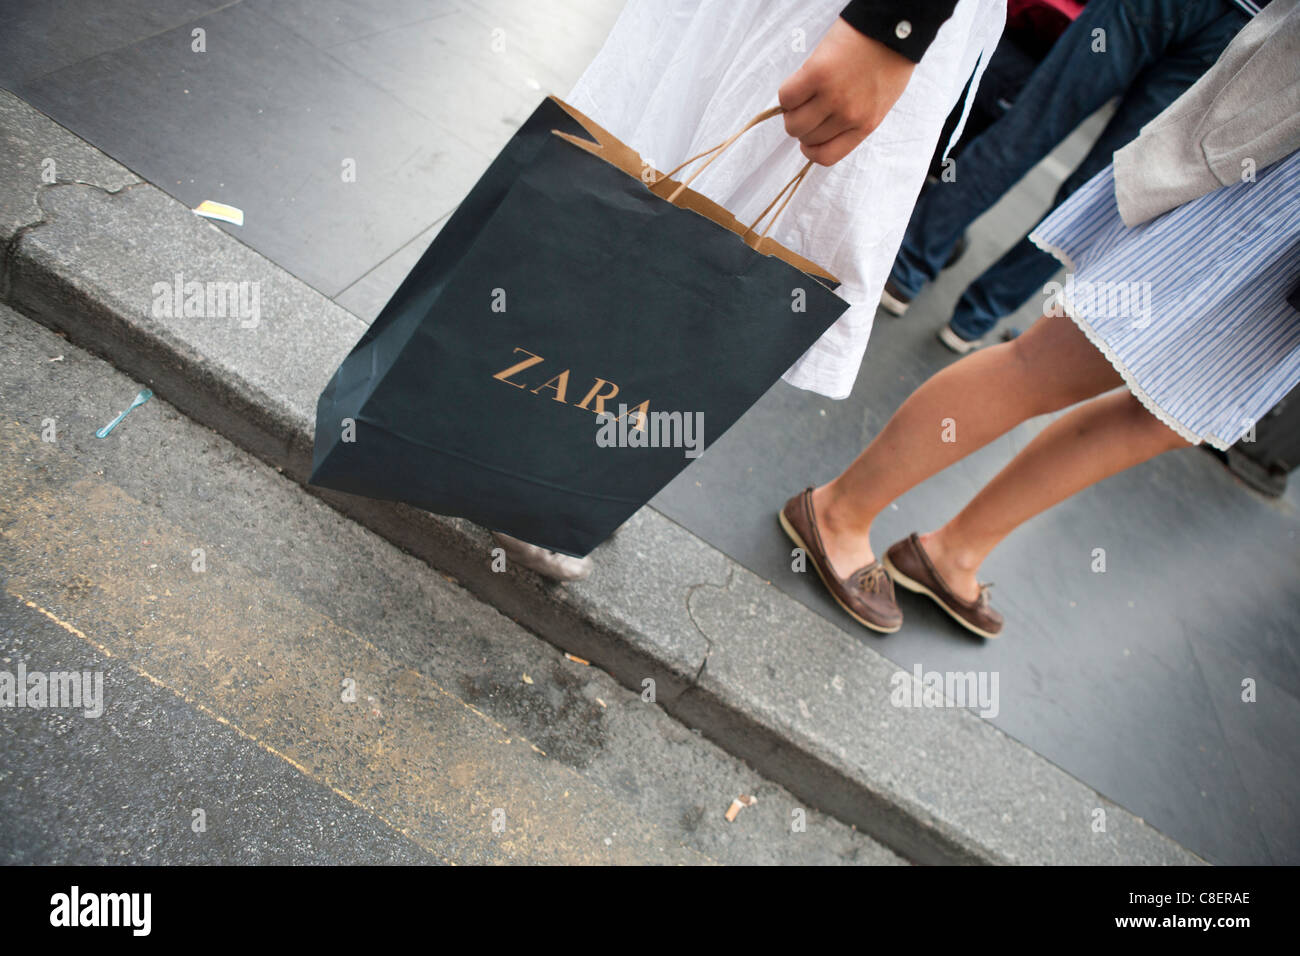 ZARA NEW COLLECTION BAGS & SHOES / JUNE 2021 